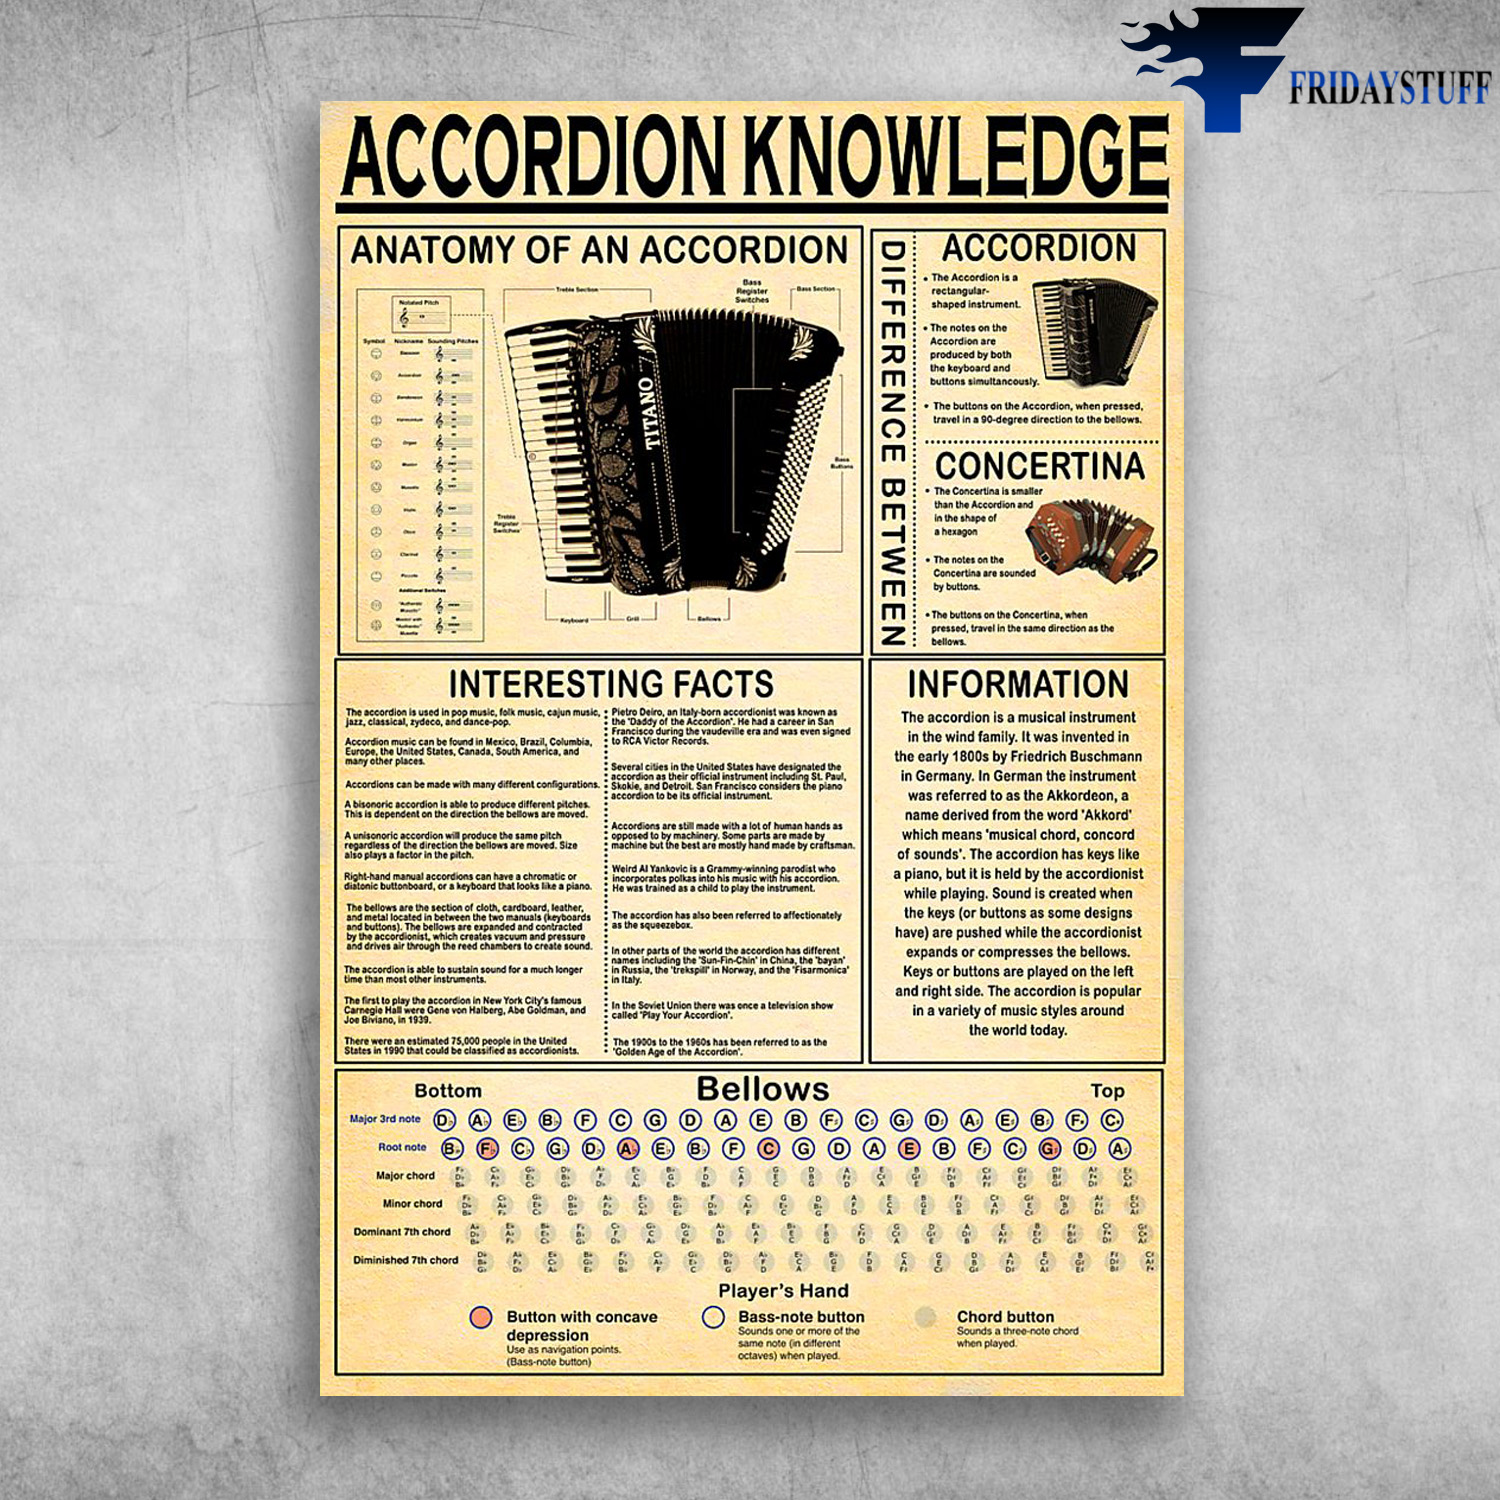 Accordion Knowledge Anatomy Of An Accordion Interesting Facts